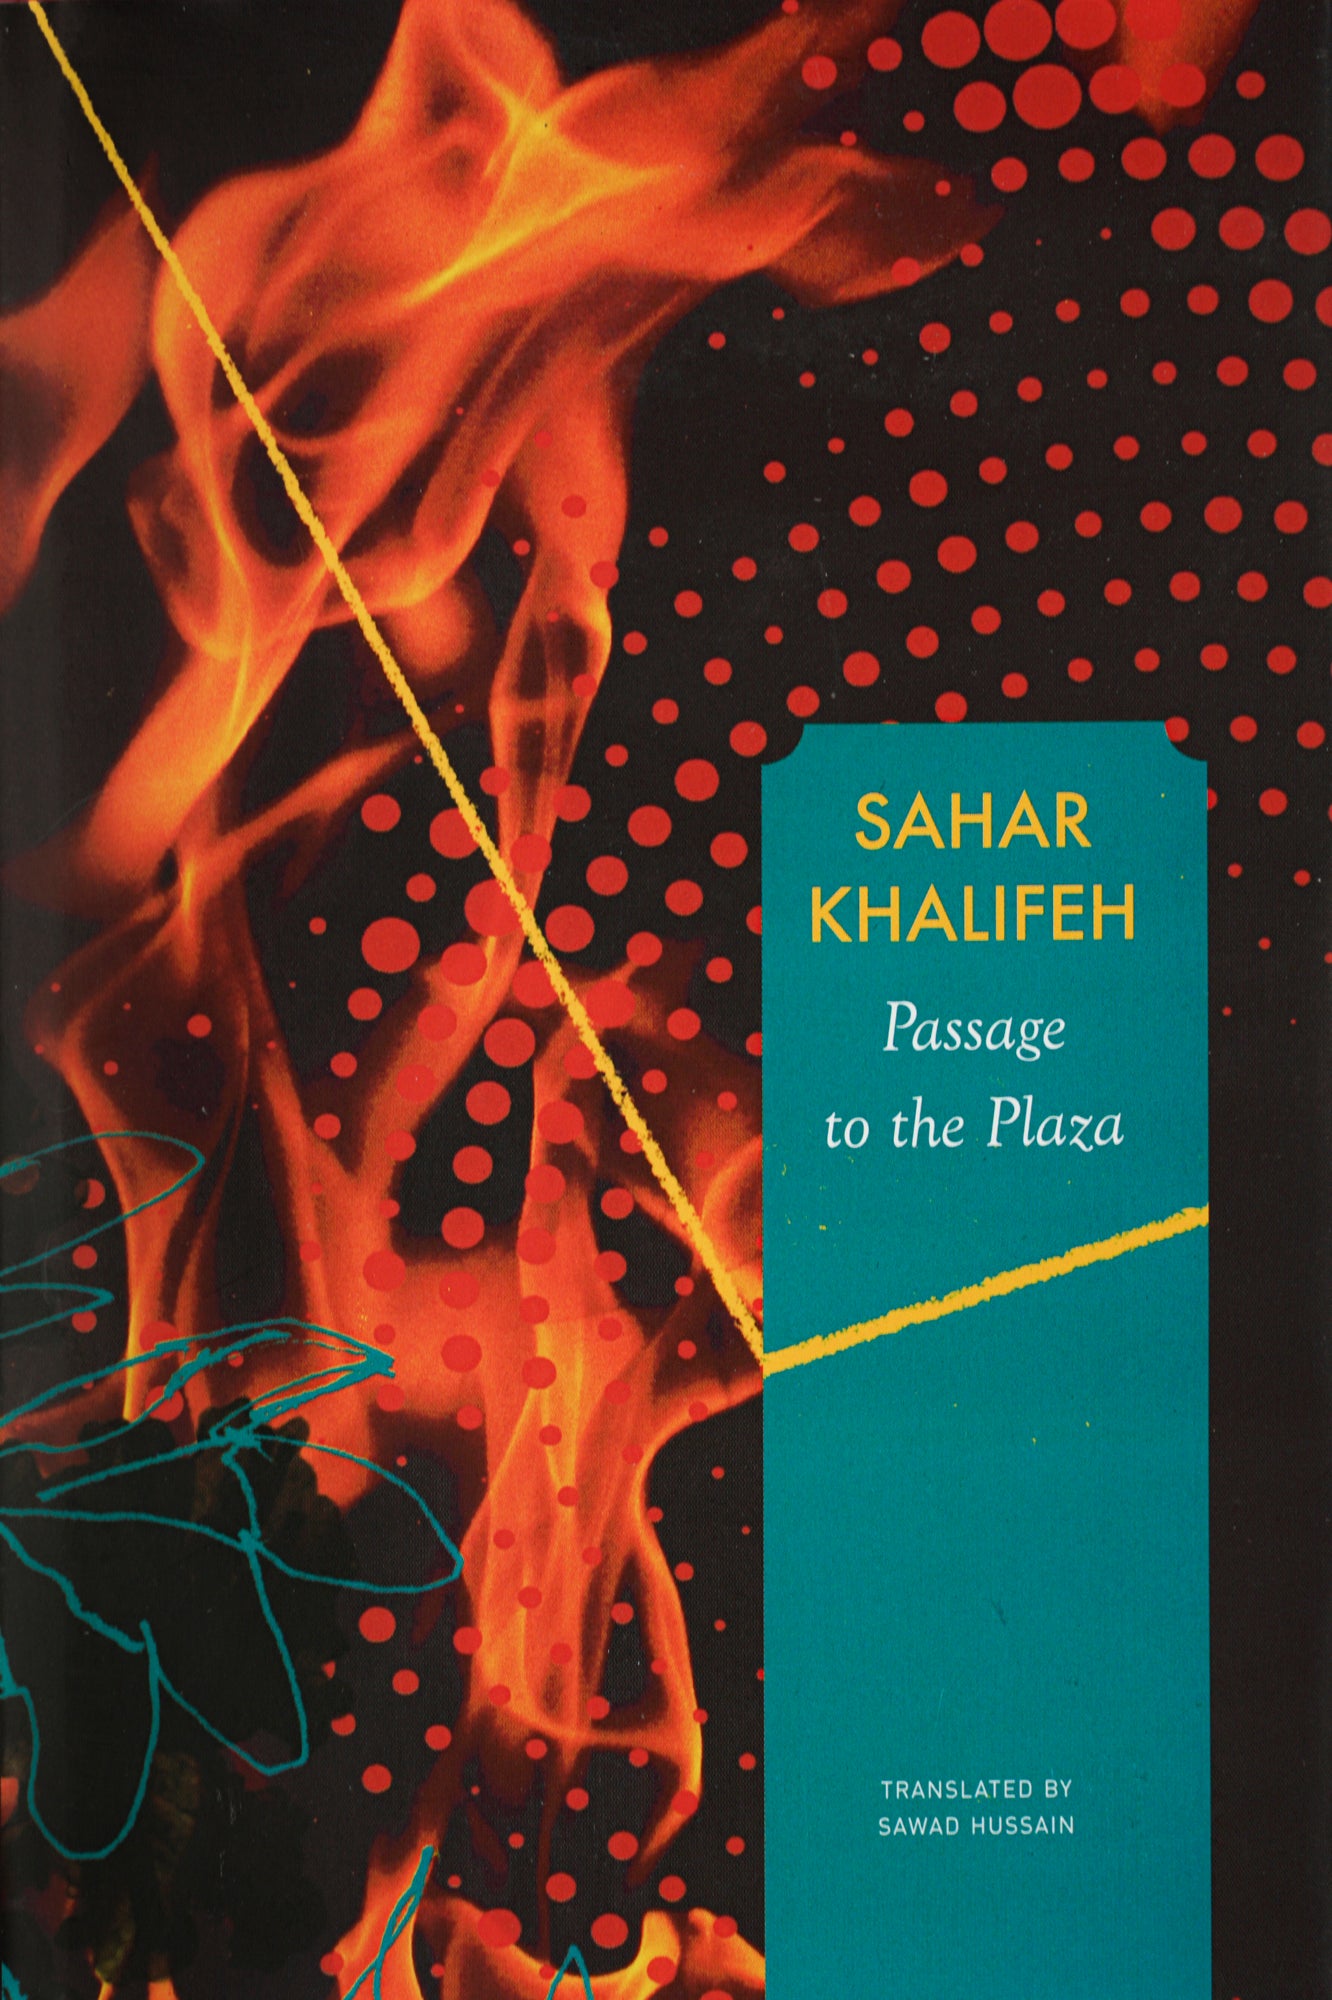 Abstract book cover with flames on the left side, and black and red dots in the upper right corner. The title and author of the book are written: SAHAR KHALIFEH Passage to the Plaza 